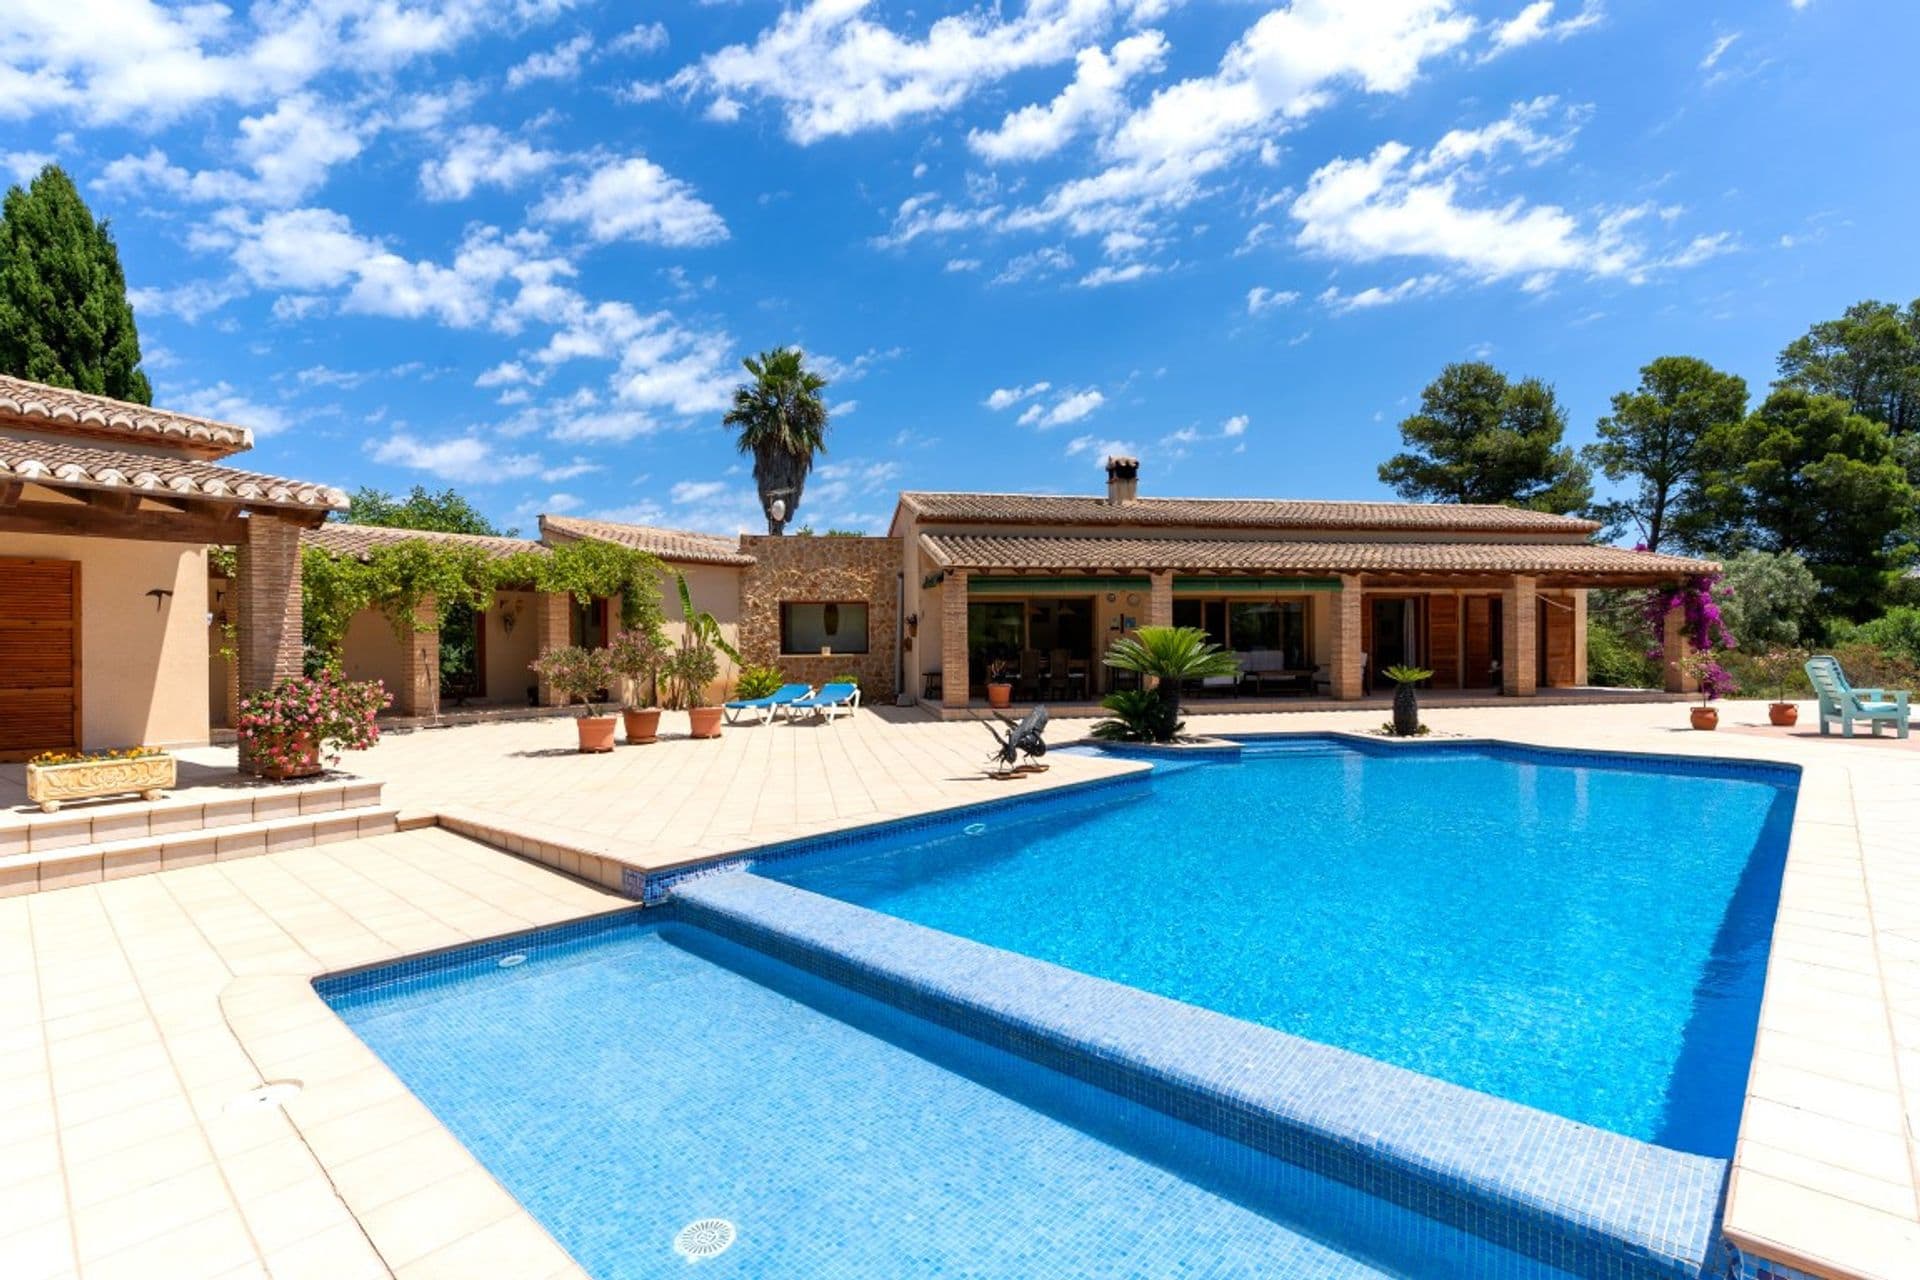 Villa with terrace areas and large pool for sale in La Plana, Jávea.